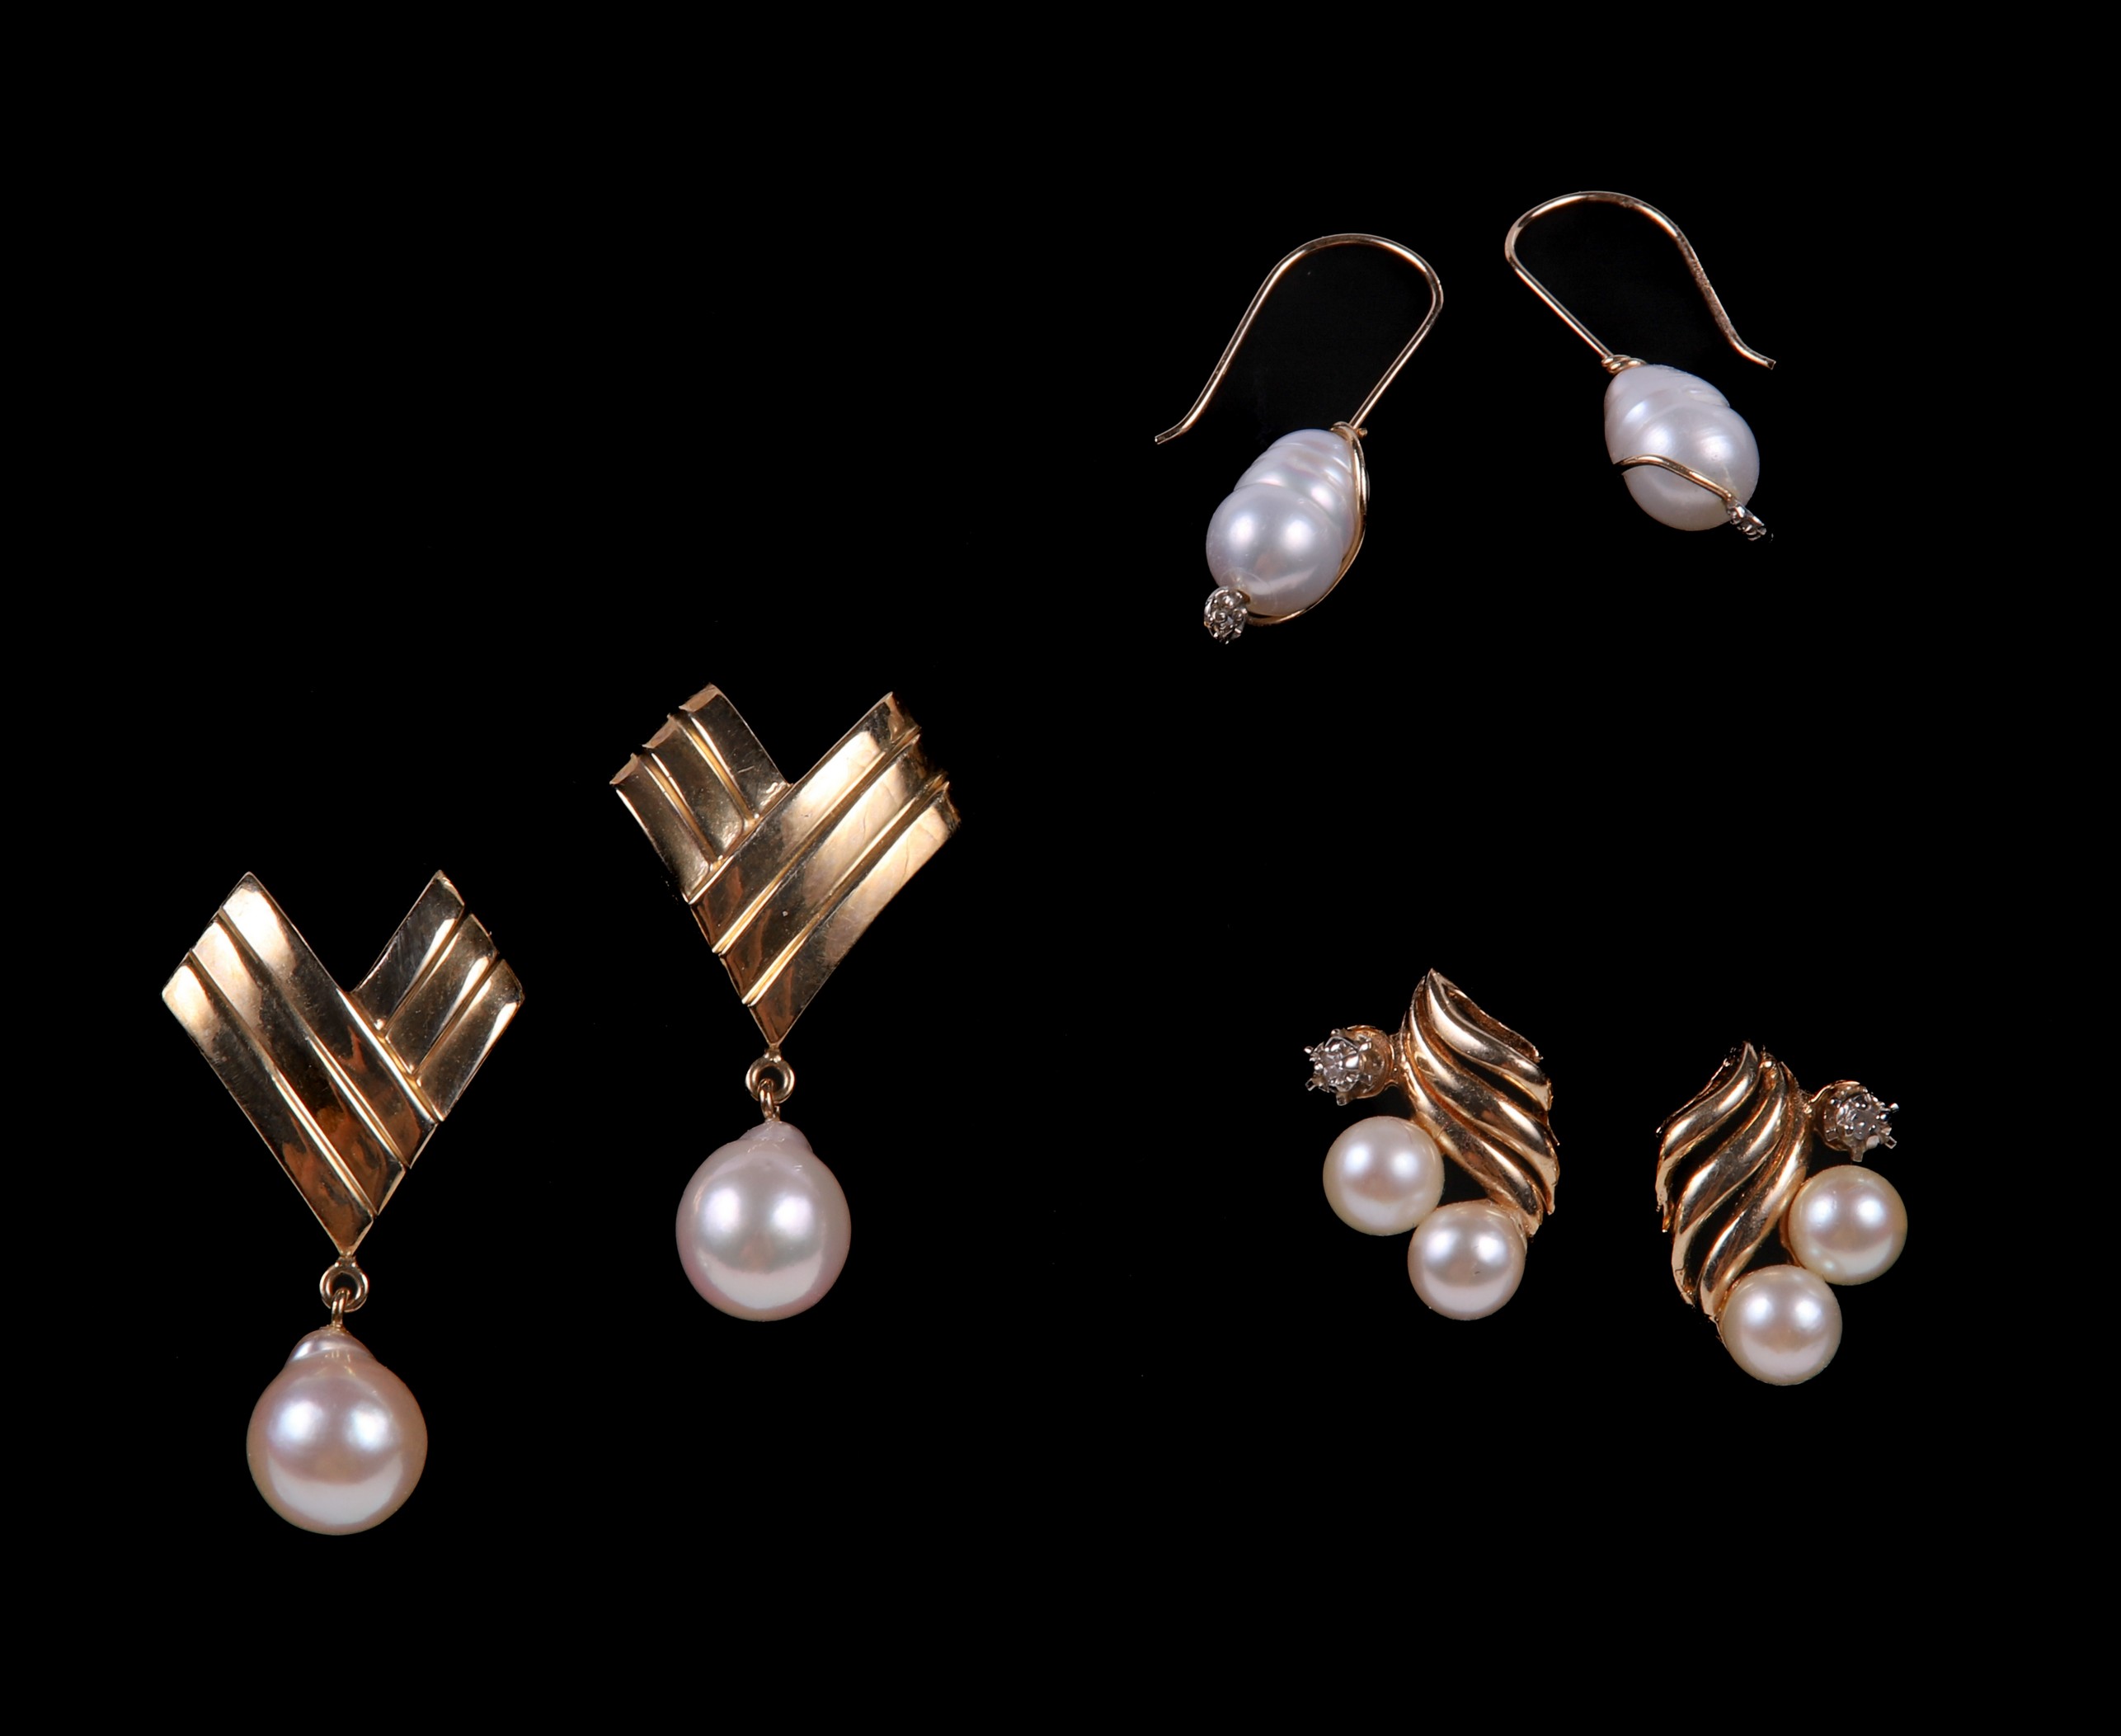  3 Pairs pearl and gold earrings 3b6458